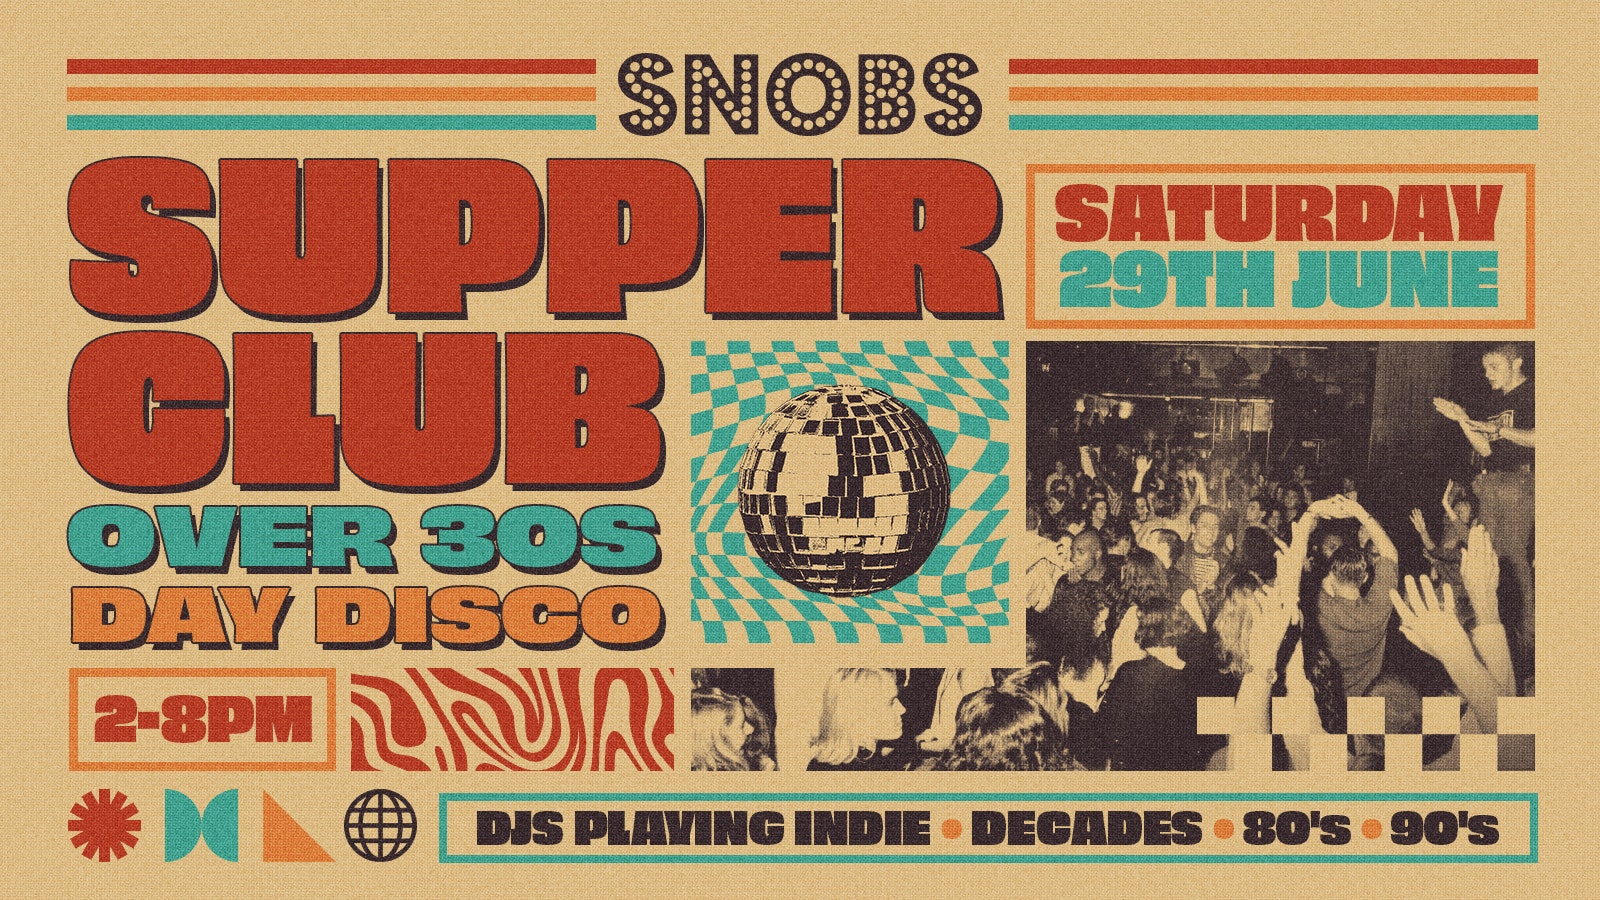 SNOBS SUPPER CLUB – [TODAY!] Over 30’s Day Disco [29TH JUNE]